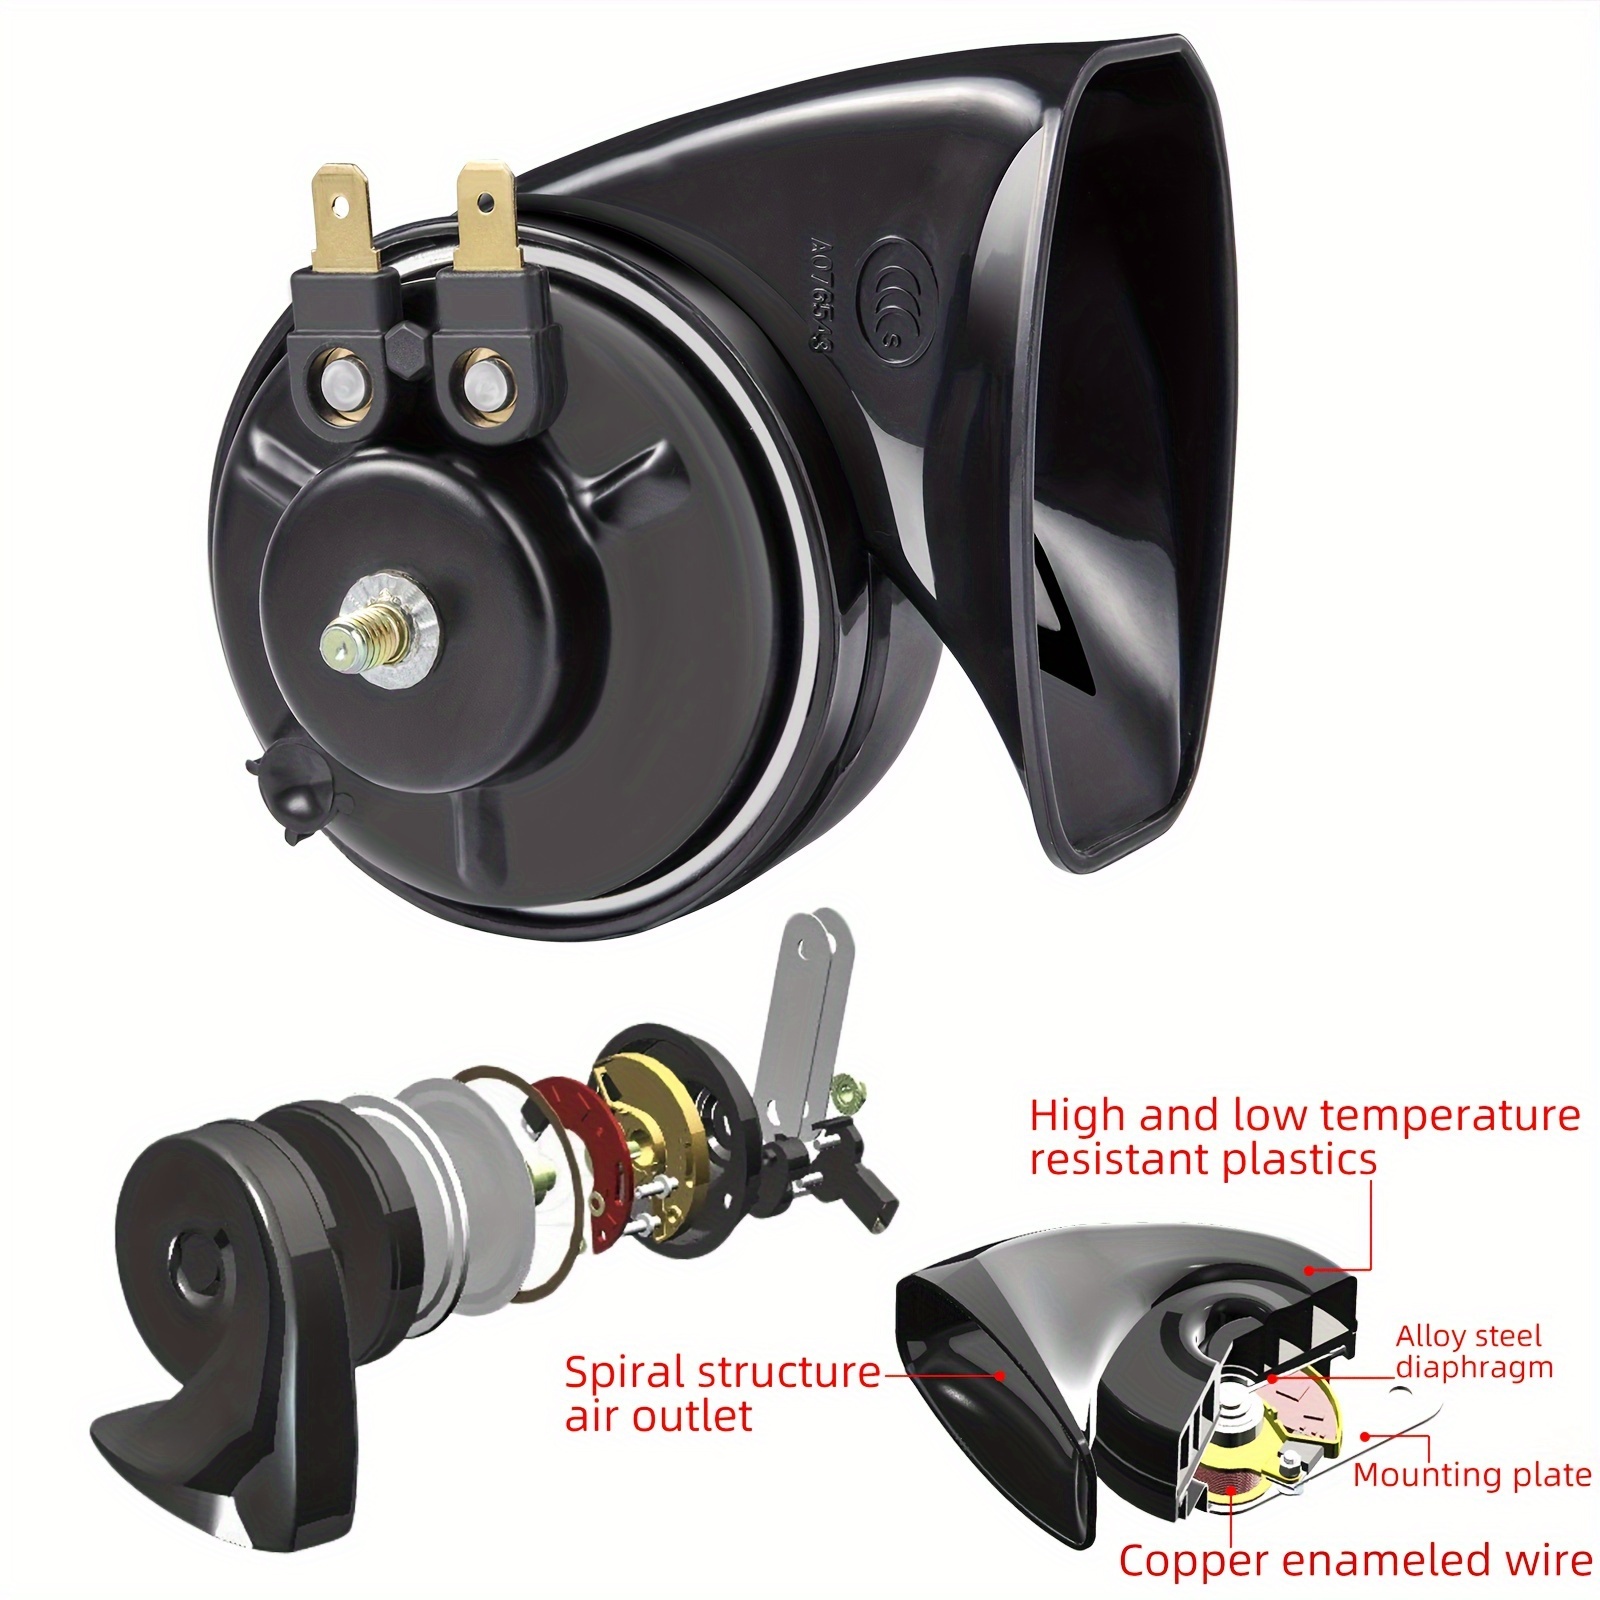  Snail Car Horn 12V Auto Horn Loud Dual-Tone Waterproof High Low  Electric Horn Kit Universal for Car Truck Pickup Motorcycle Train Ship Van  : Automotive